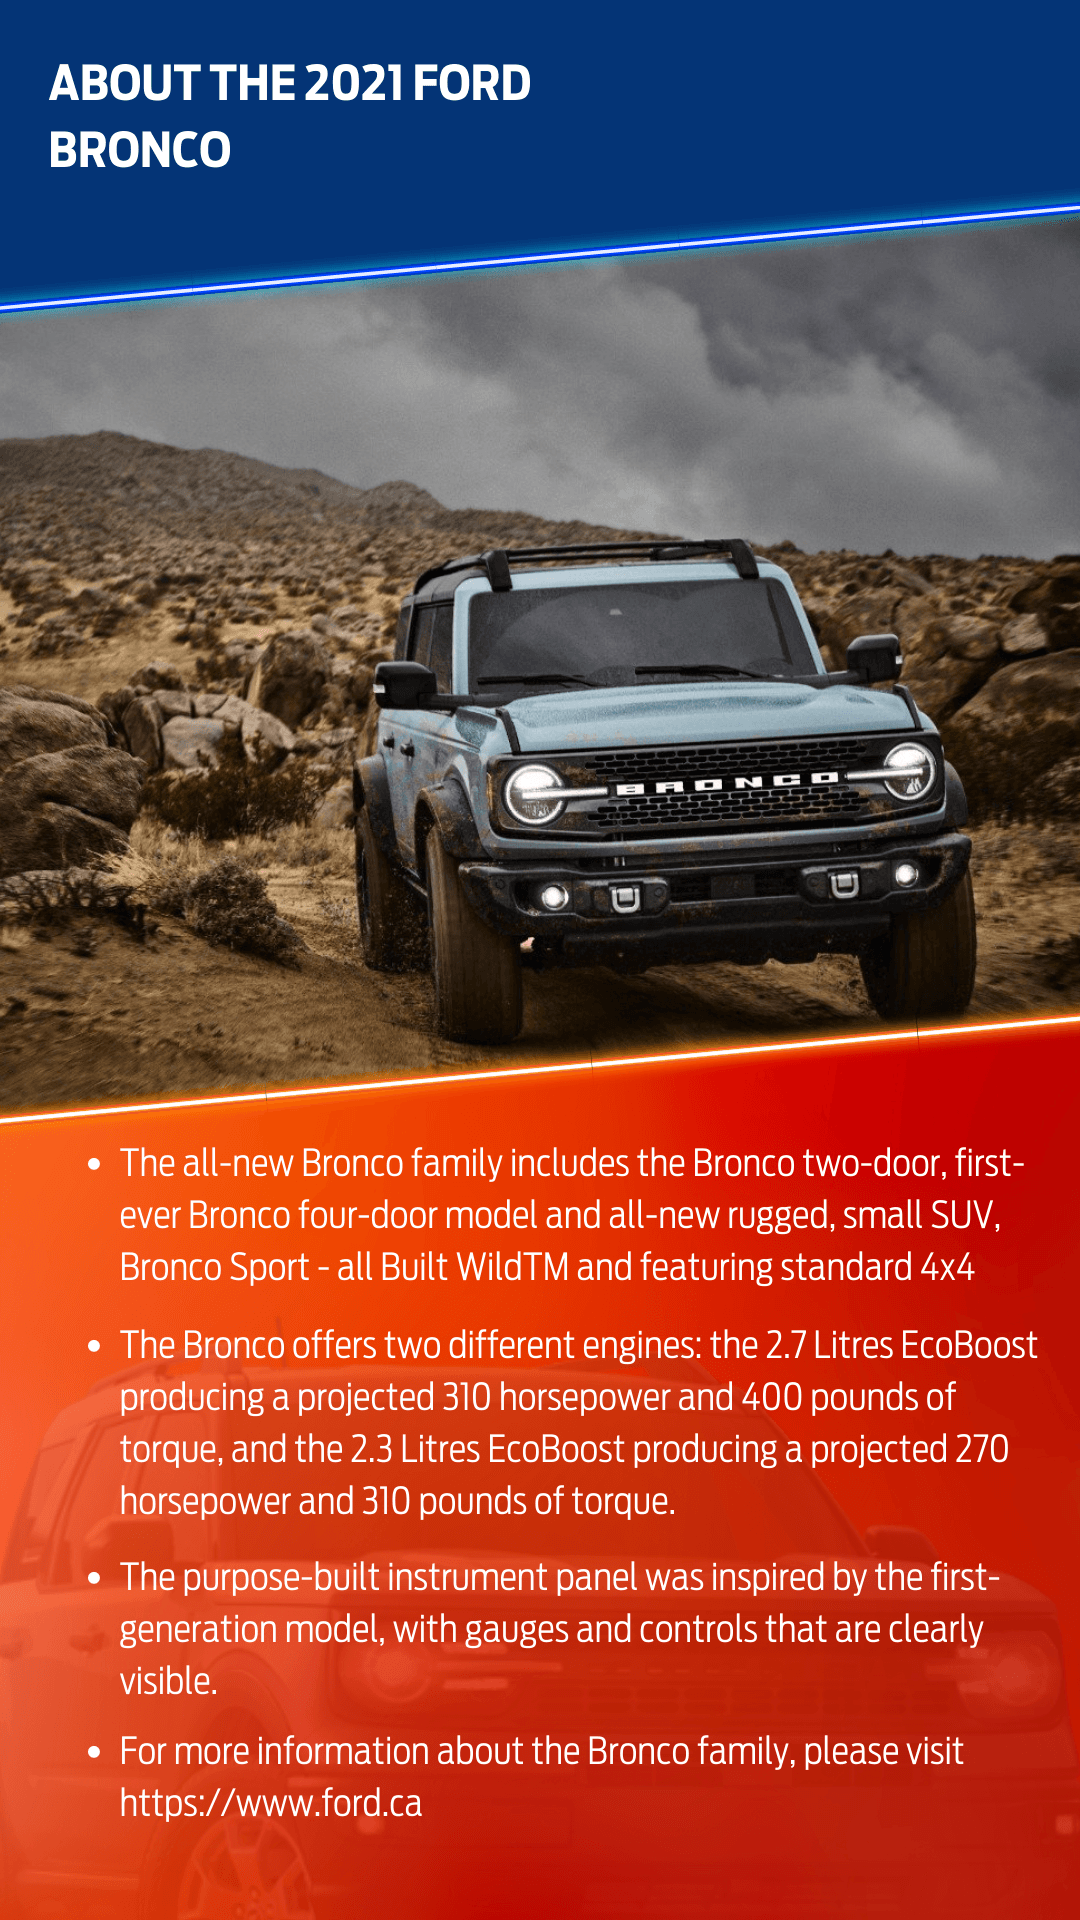 About the 2021 FORD BRONCO